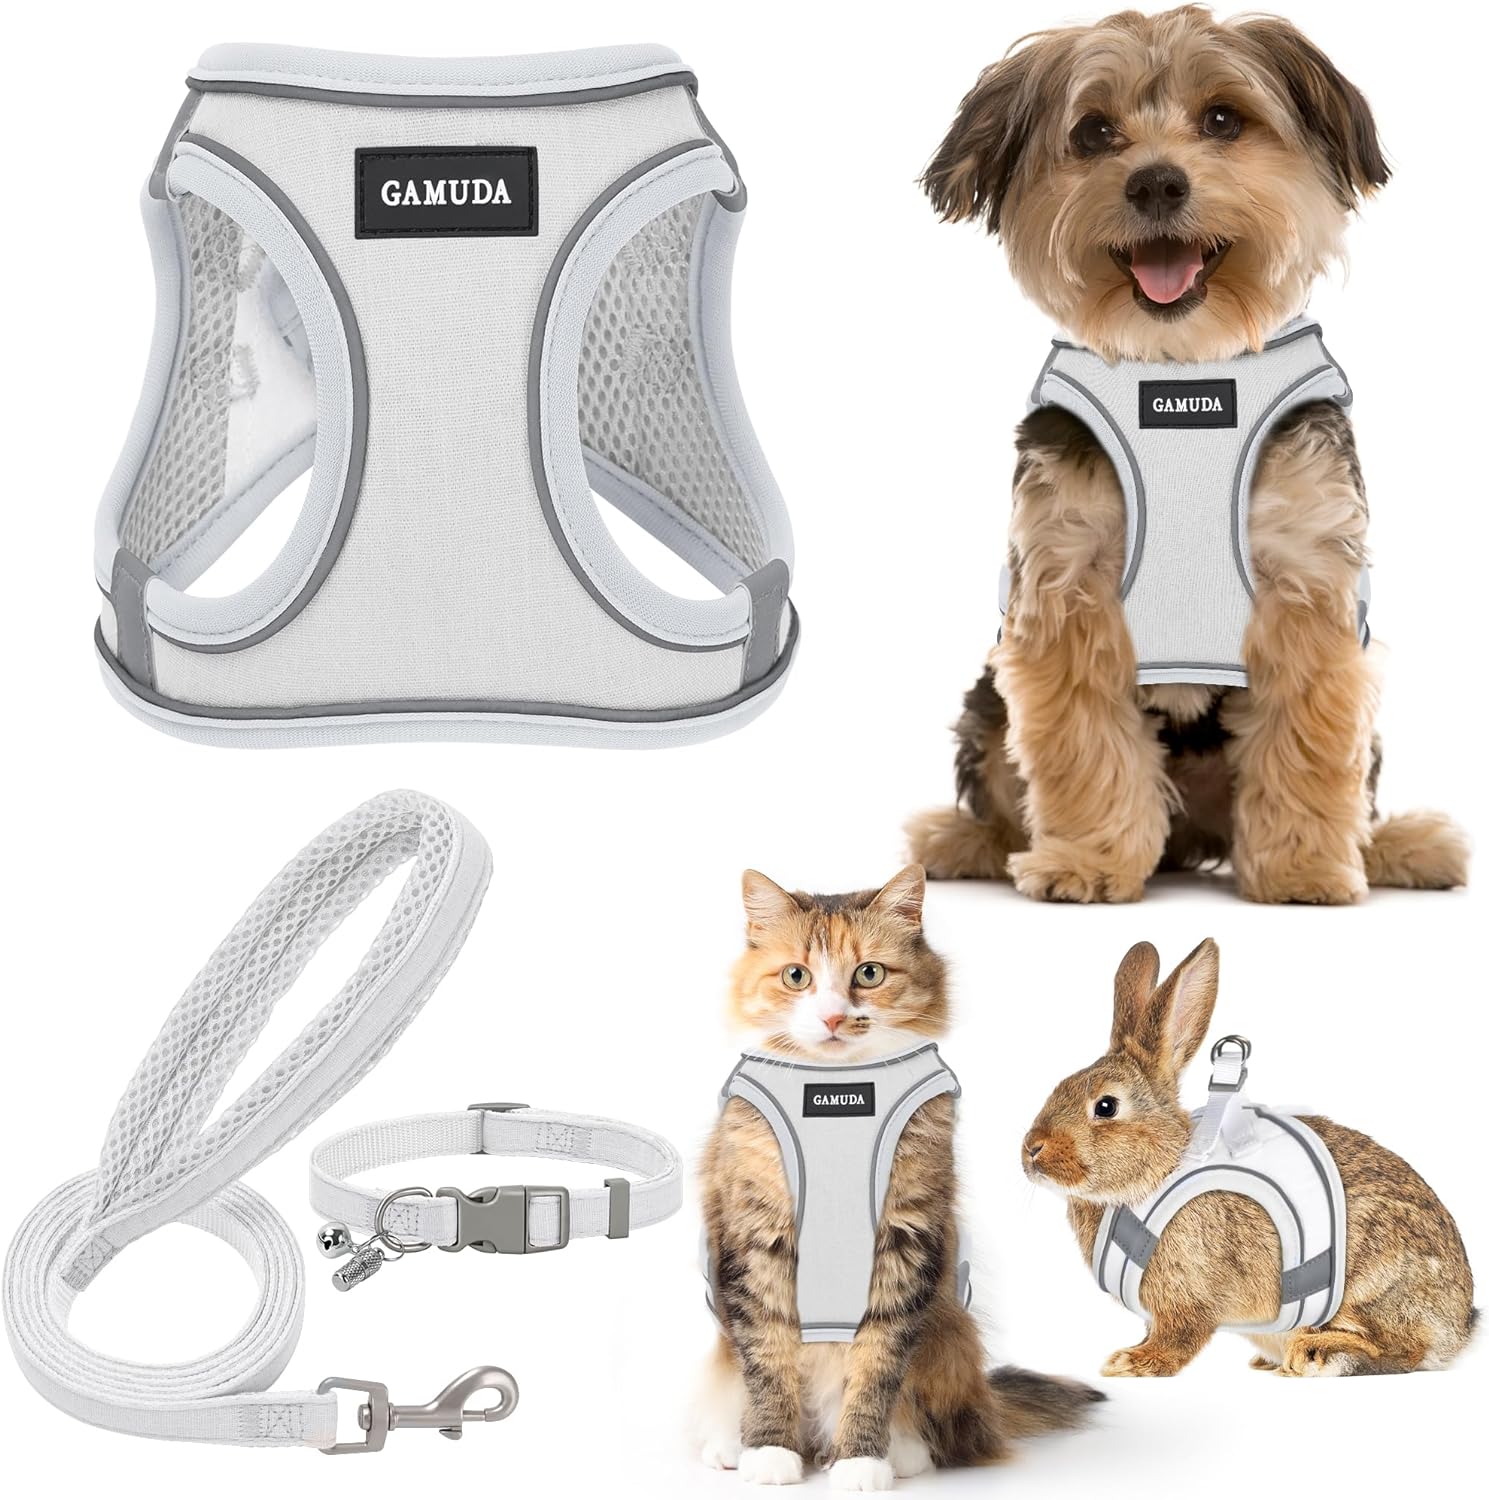 GAMUDA Small Pet Harness Collar and Leash Set, Step in No Chock No Pull Linen Fabric Soft Mesh Dog Vest Harnesses Reflective for Dogs Puppy Cats Kitten Rabbit (XS, White)